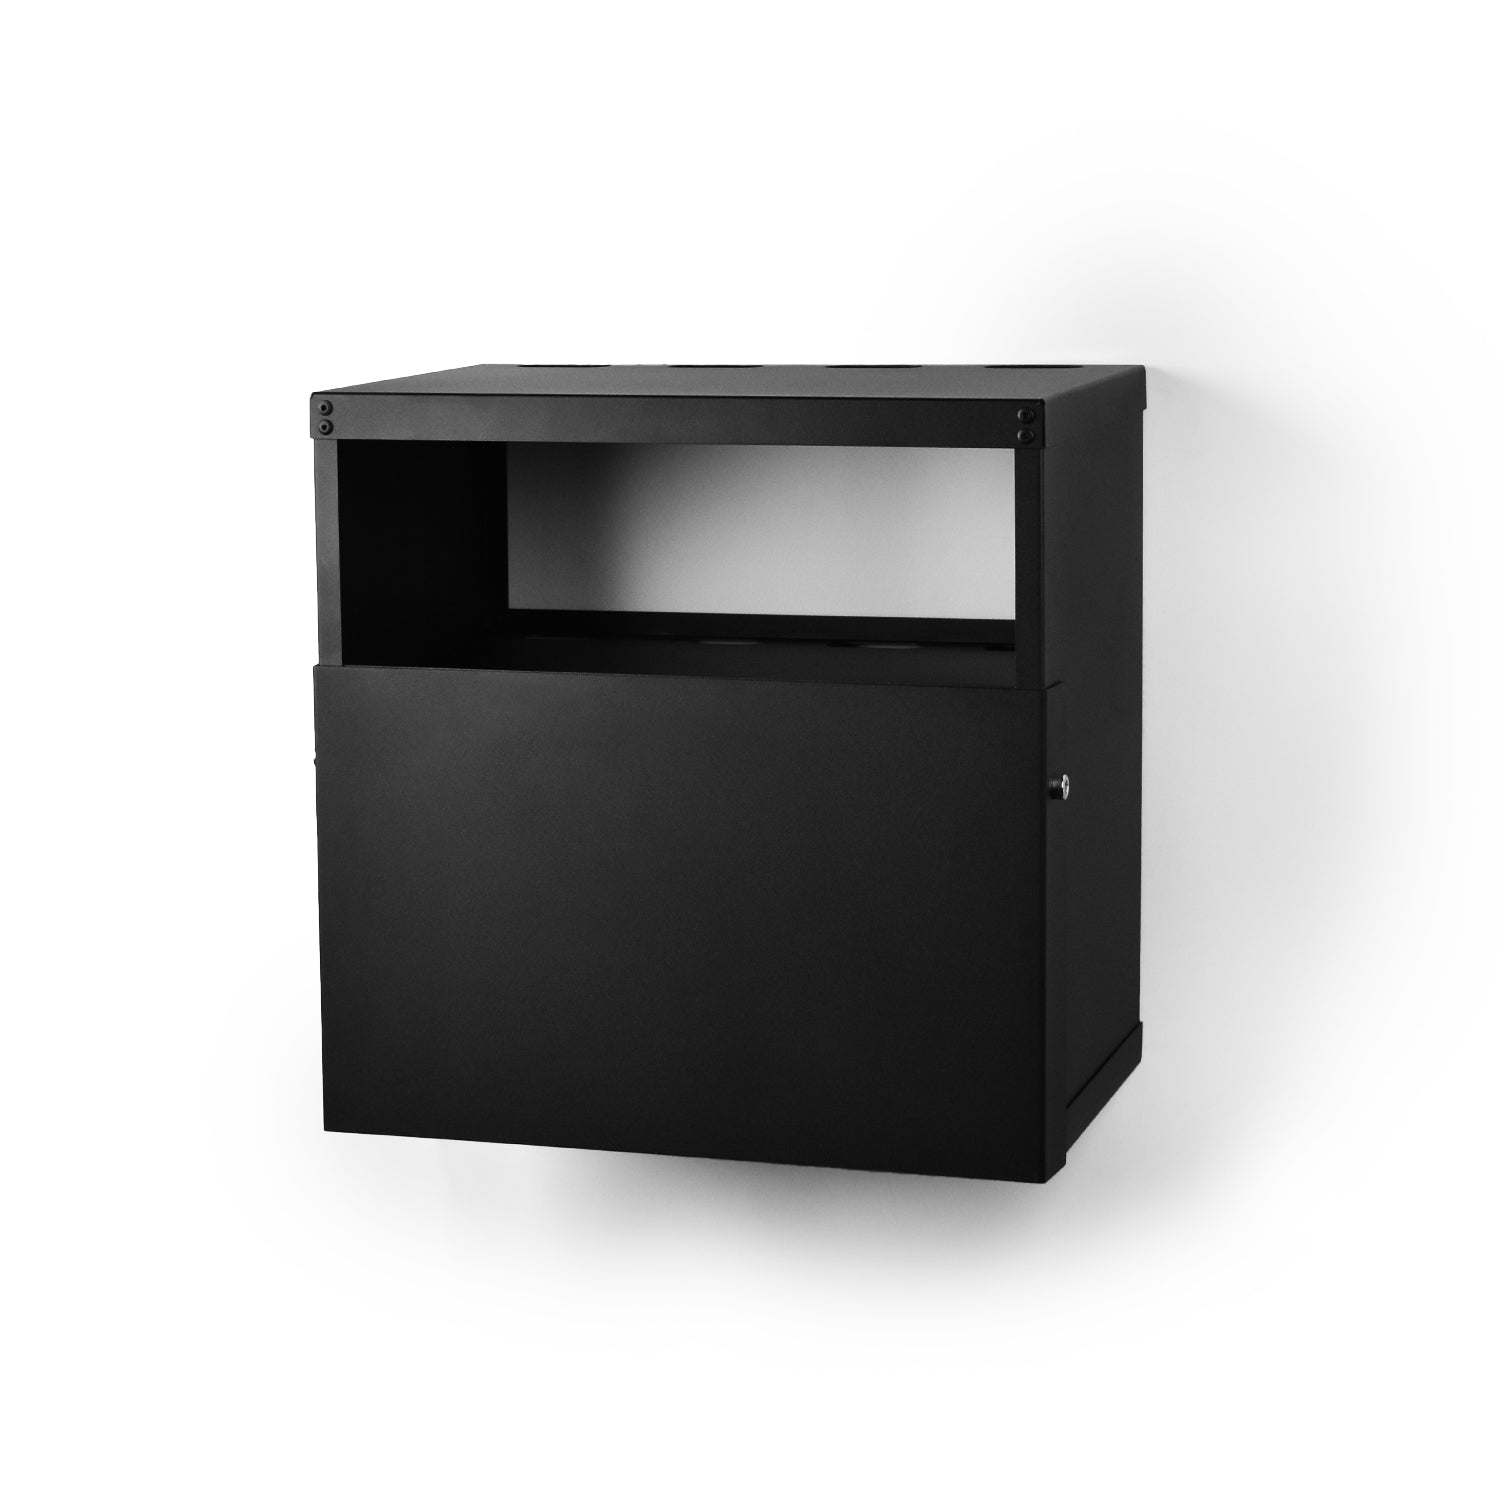 Okunaii Wi-Fi Router & Computer Supplies Wall Mount Cabinet